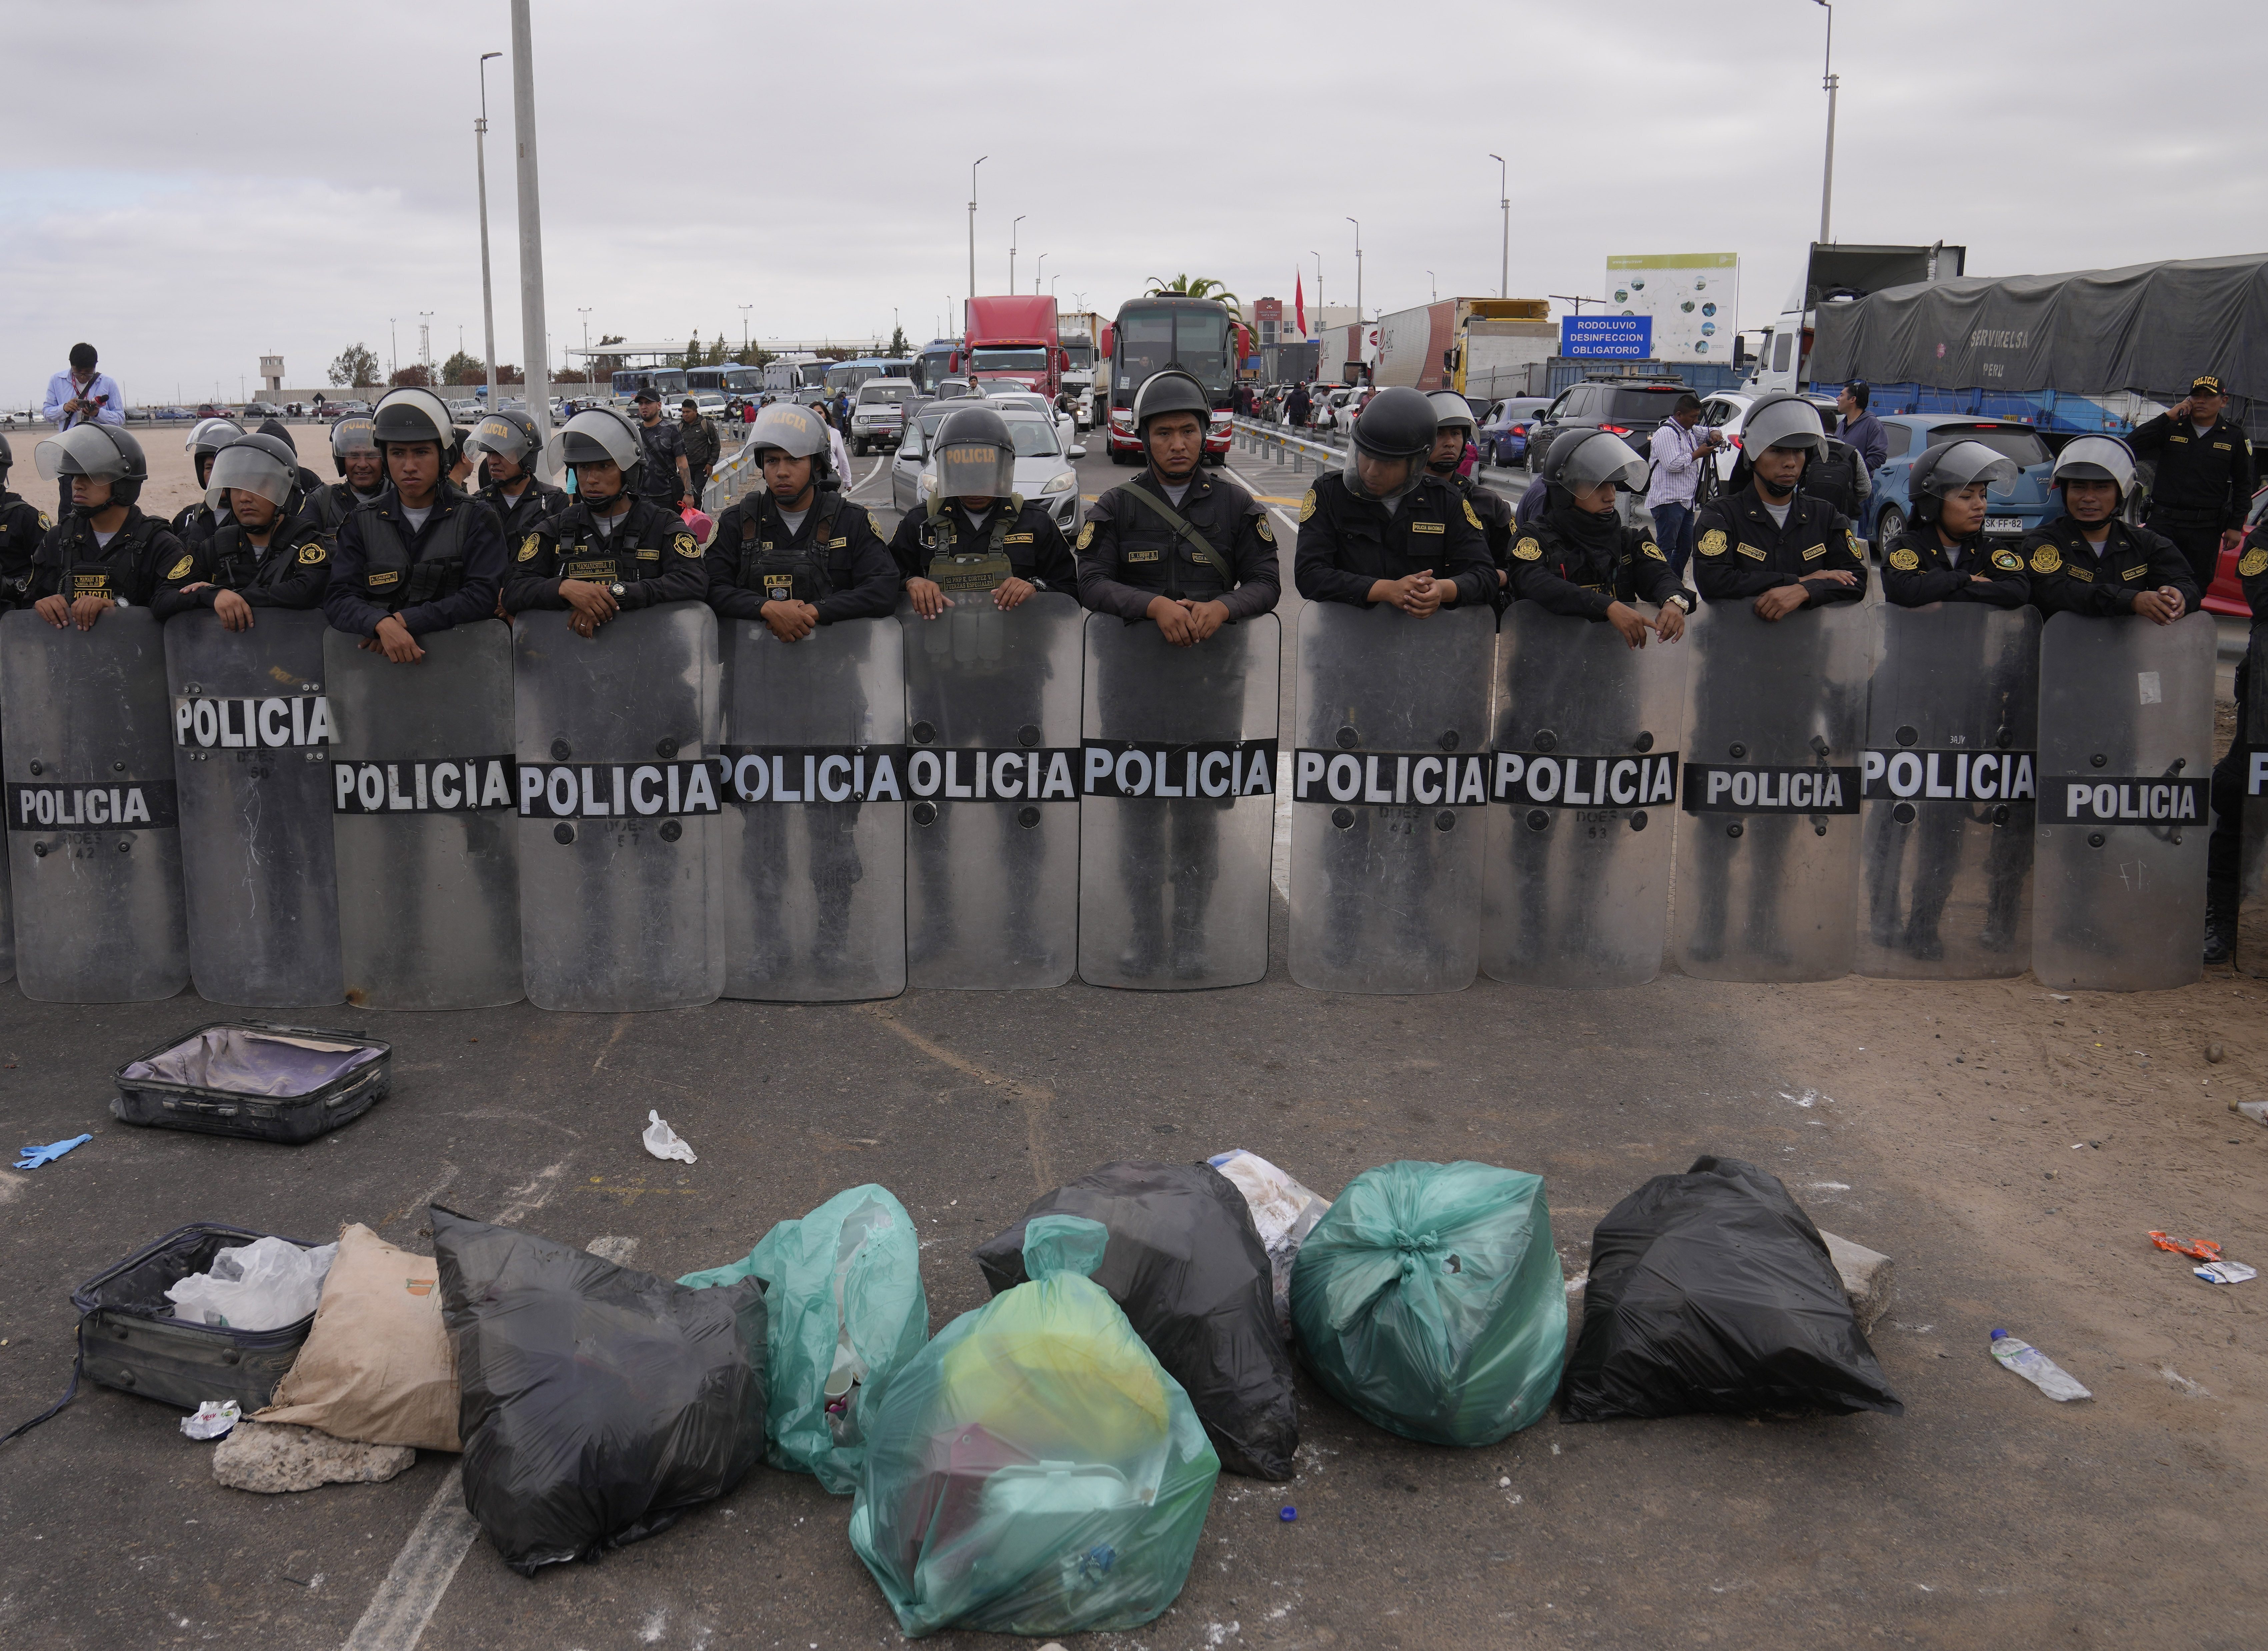 Venezuelan migrants block entry to Chile with garbage in front of a Peruvian riot police barricade on the Peruvian border with Chile, in Tacna, Peru, Saturday, April 29, 2023. A migration crisis on the Chile-Peru border has intensified as hundreds of migrants were stranded unable to cross into Peru.  (AP Photo/Martin Mejia)